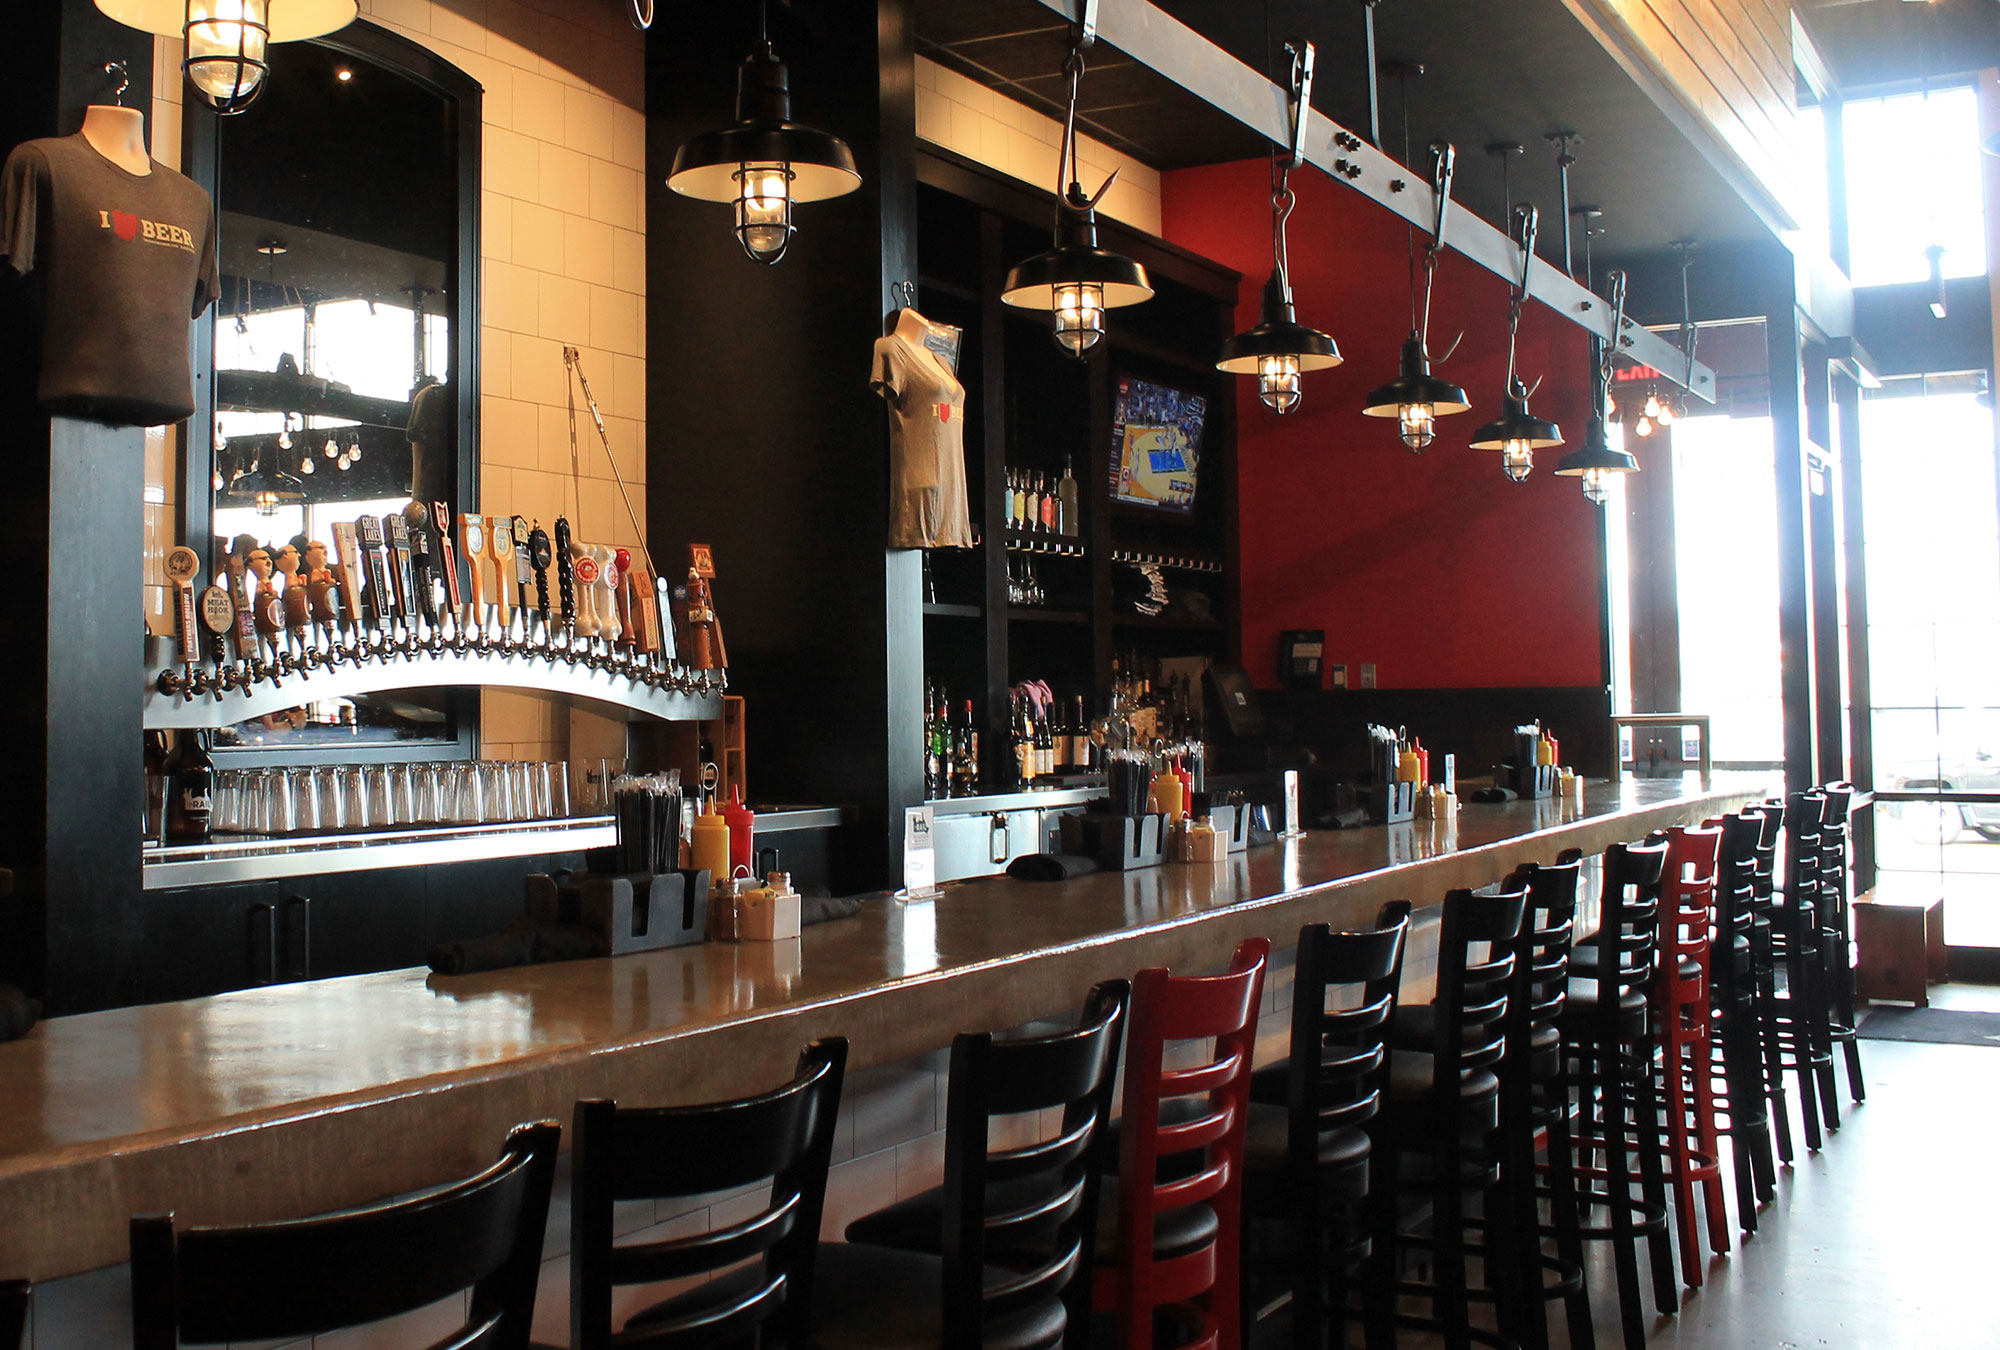 Best Contractor for Restaurant Bar Seating - Canton, Ohio by Fred Olivieri